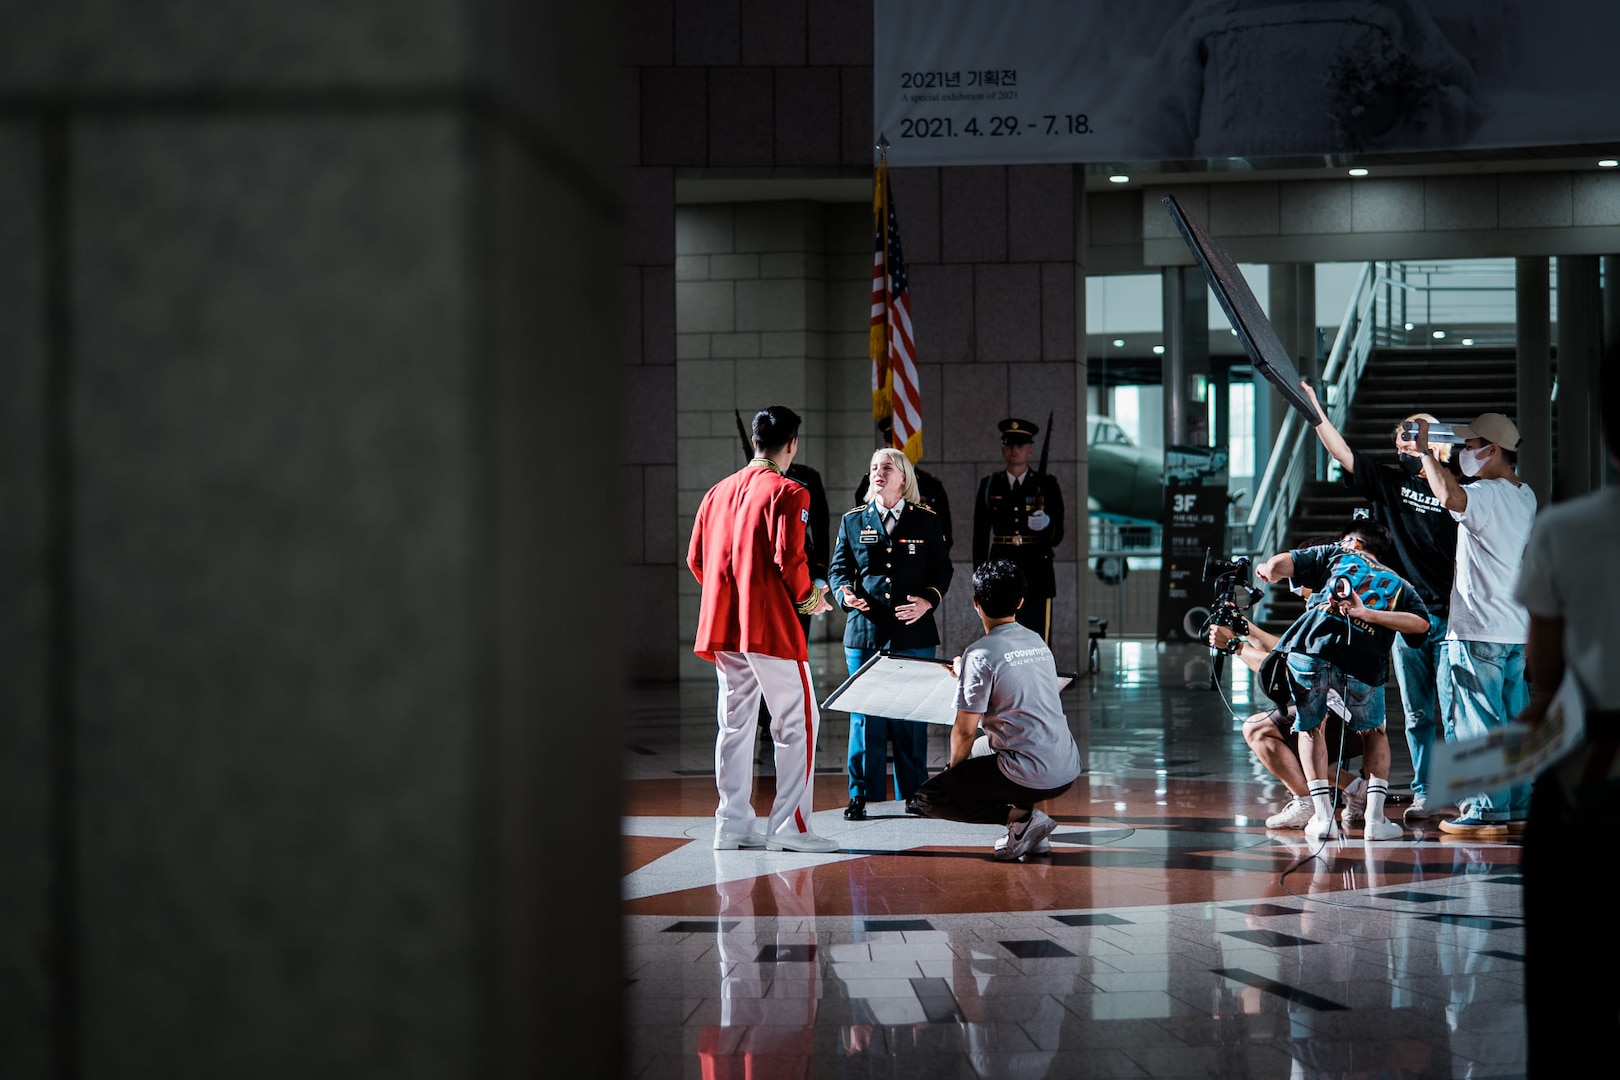 ROK Army Sgt. Yook Sung-jae in dress uniform and U.S. Army Spc. Brittany D. Simmons in dress uniform are standing in the center look at one another, while a video crew with cameras, lighting and sound are to the right of the frame. The left of the frame is blocked by a blurred wall. They're standing in the center of a rotunda located at the War Memorial of Korea.